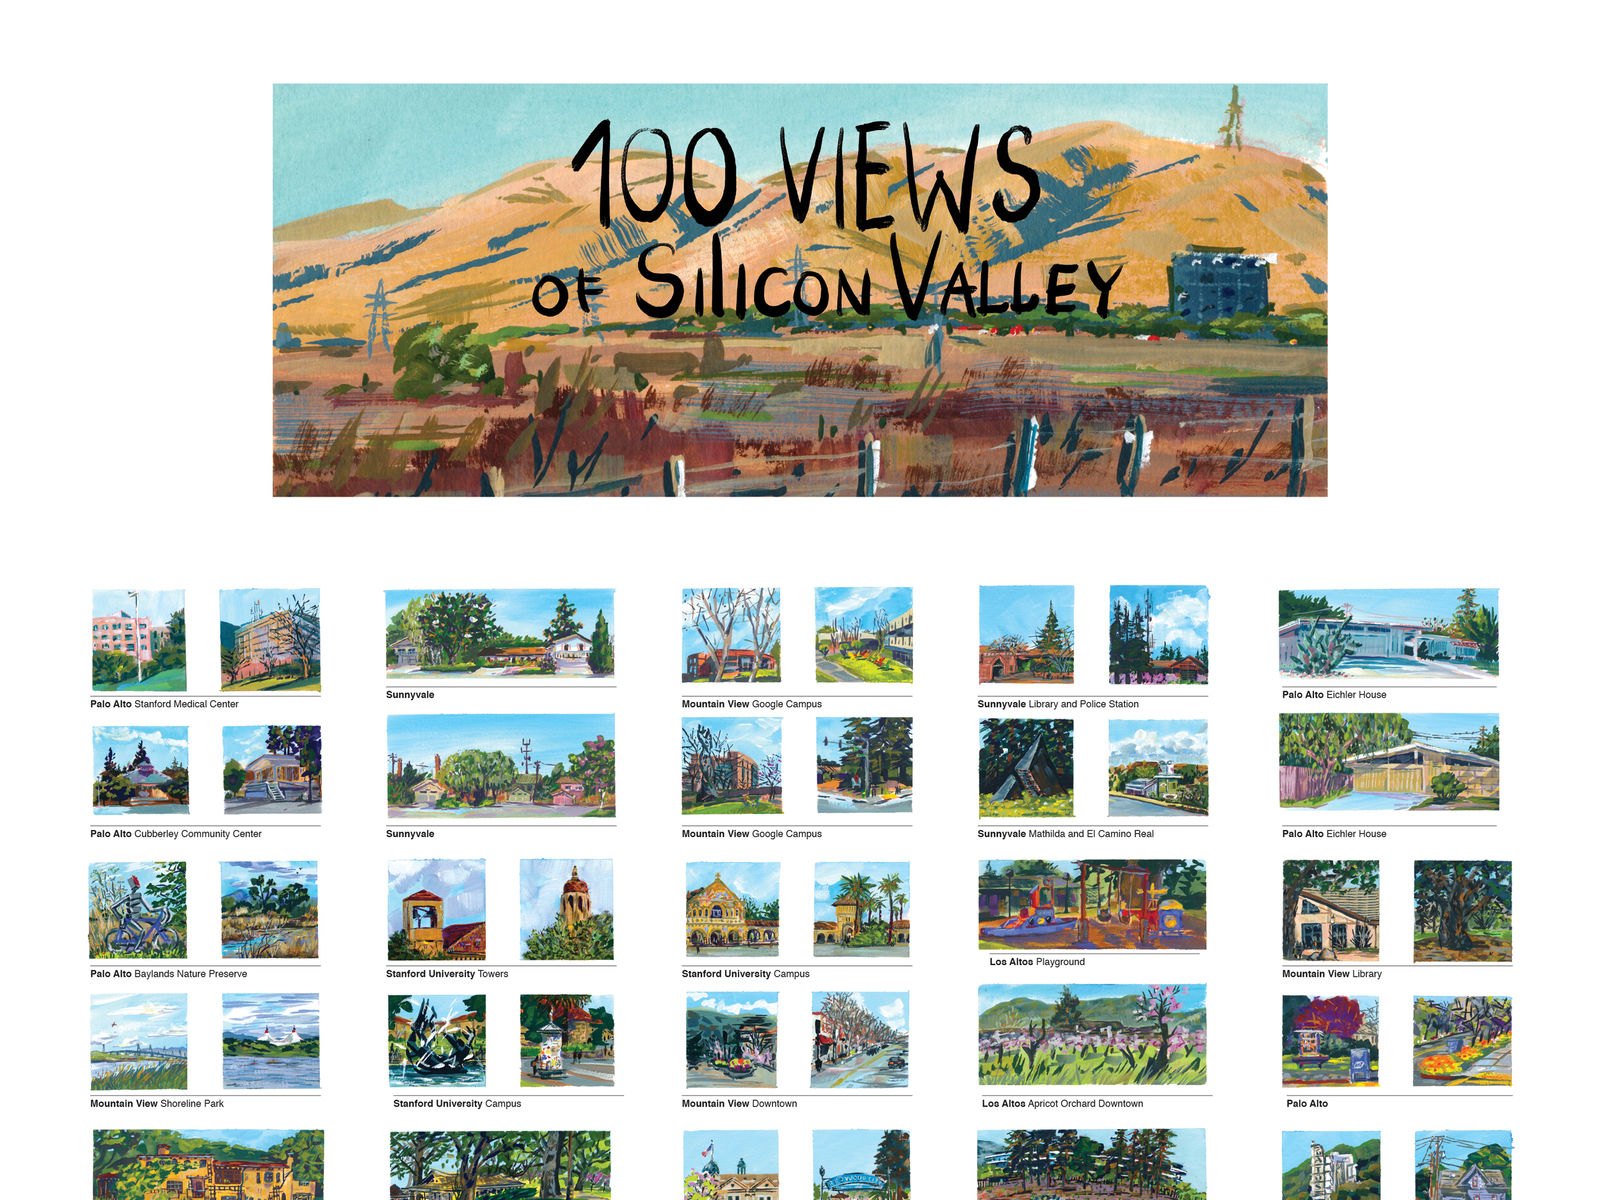 100 Views of Silicon Valley Poster by Nina Khashchina on Dribbble